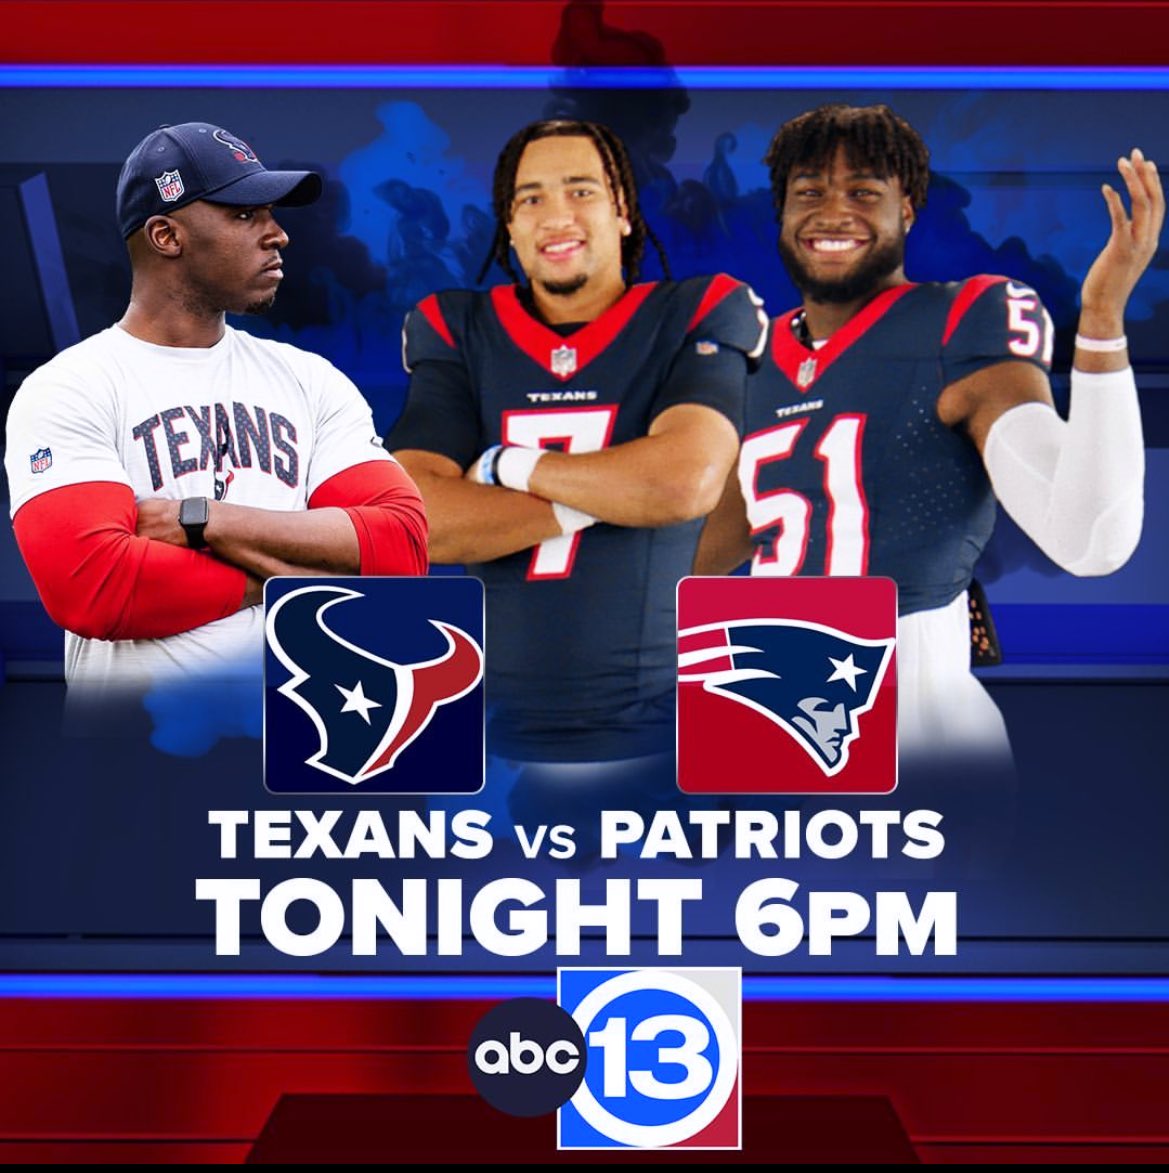 Are you ready for some football? 🏈 We are at @abc13houston. 😍 📺: Texans/Patriots preseason game tonight at 6 p.m. CST abc13.com/texans-vs-patr…